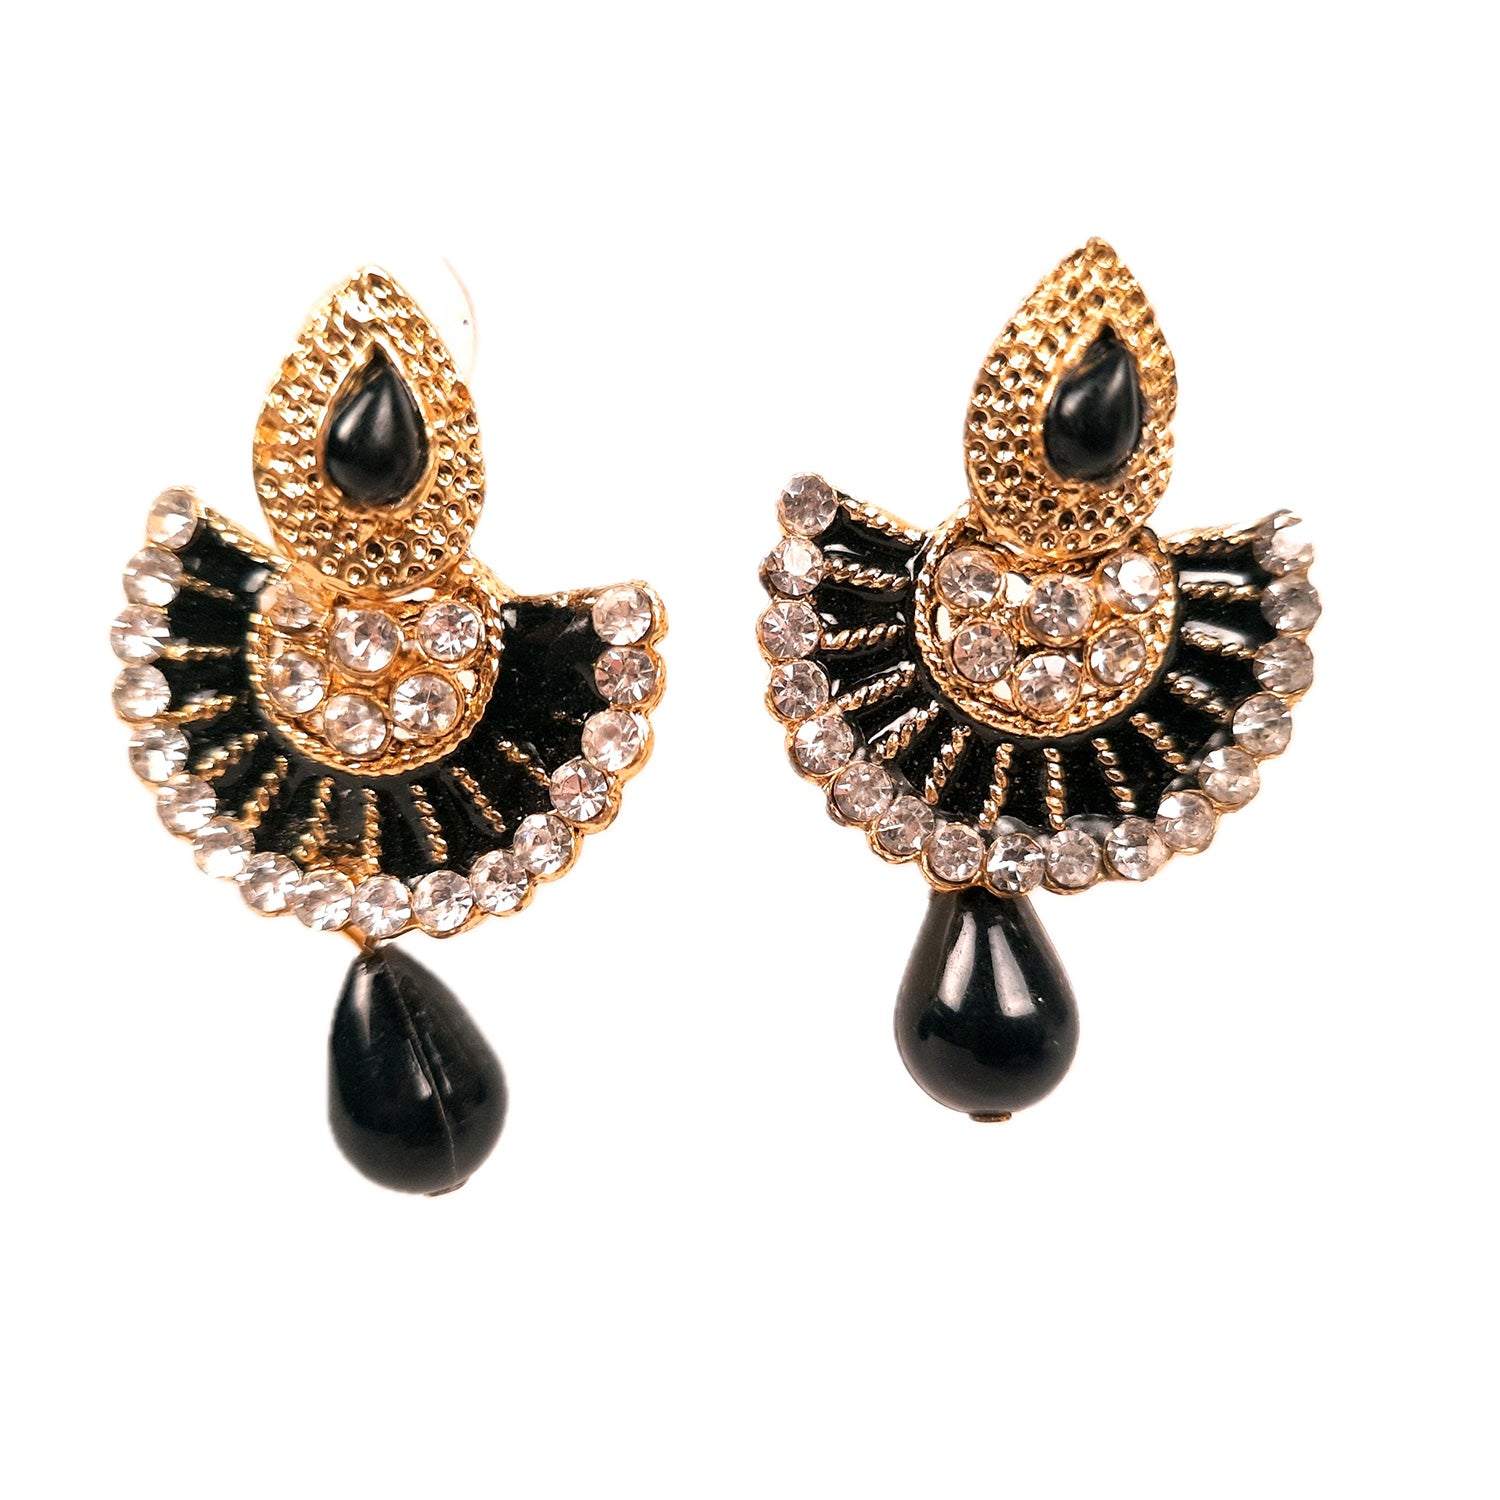 Earring Stud - Black Floral Drop Earrings | Latest Stylish Fashion Jewellery | Gifts for Her, Friendship Day, Valentine's Day Gift - apkamart